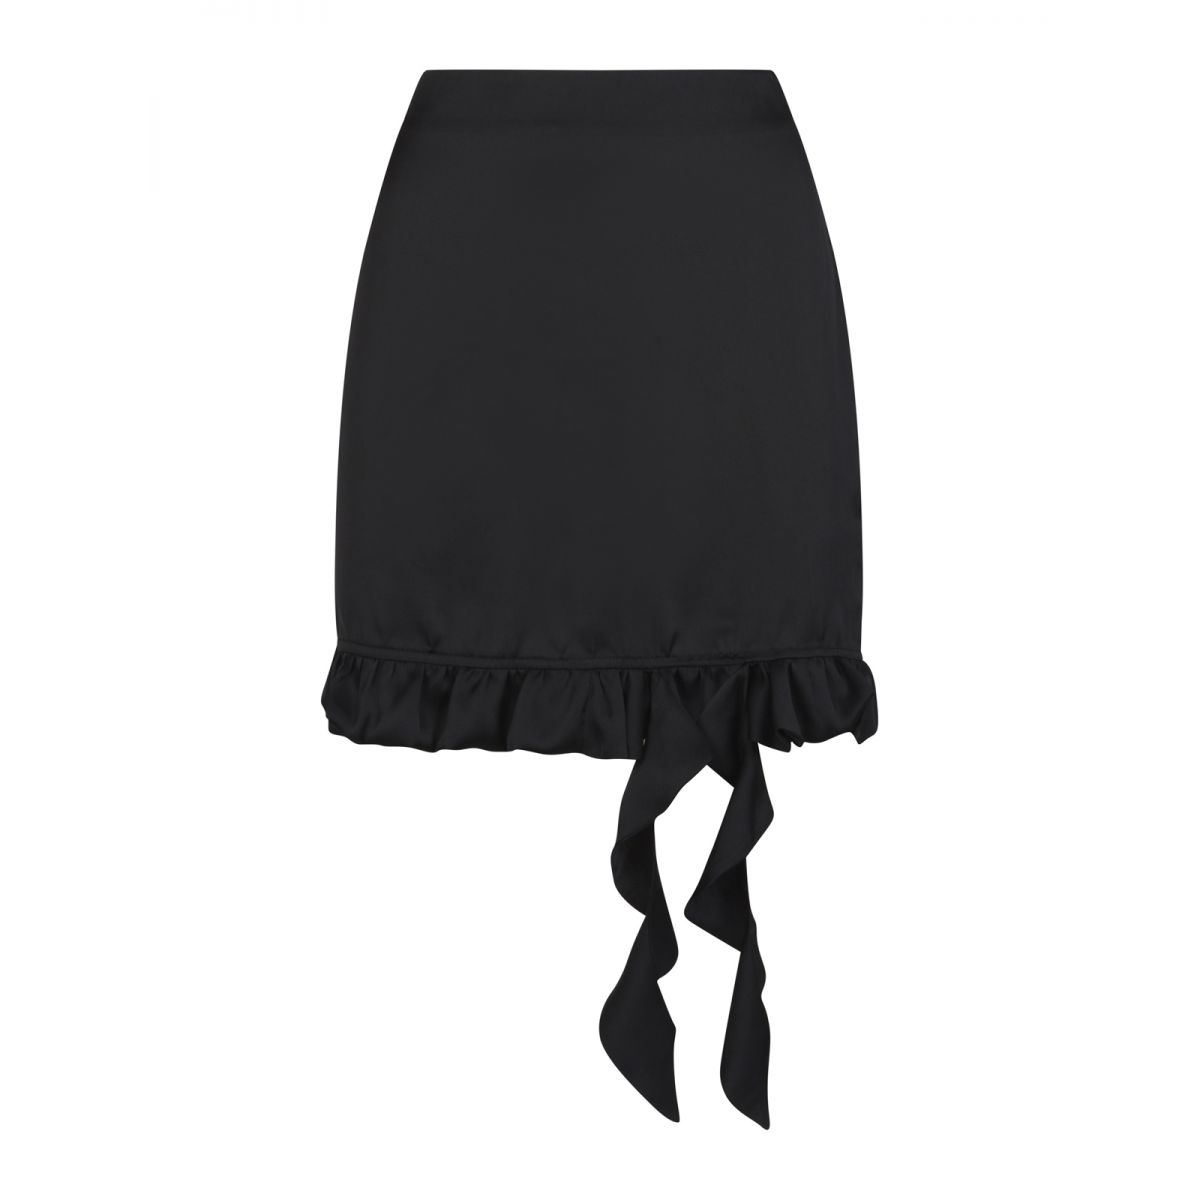 REMAIN - Skirt with embellishment